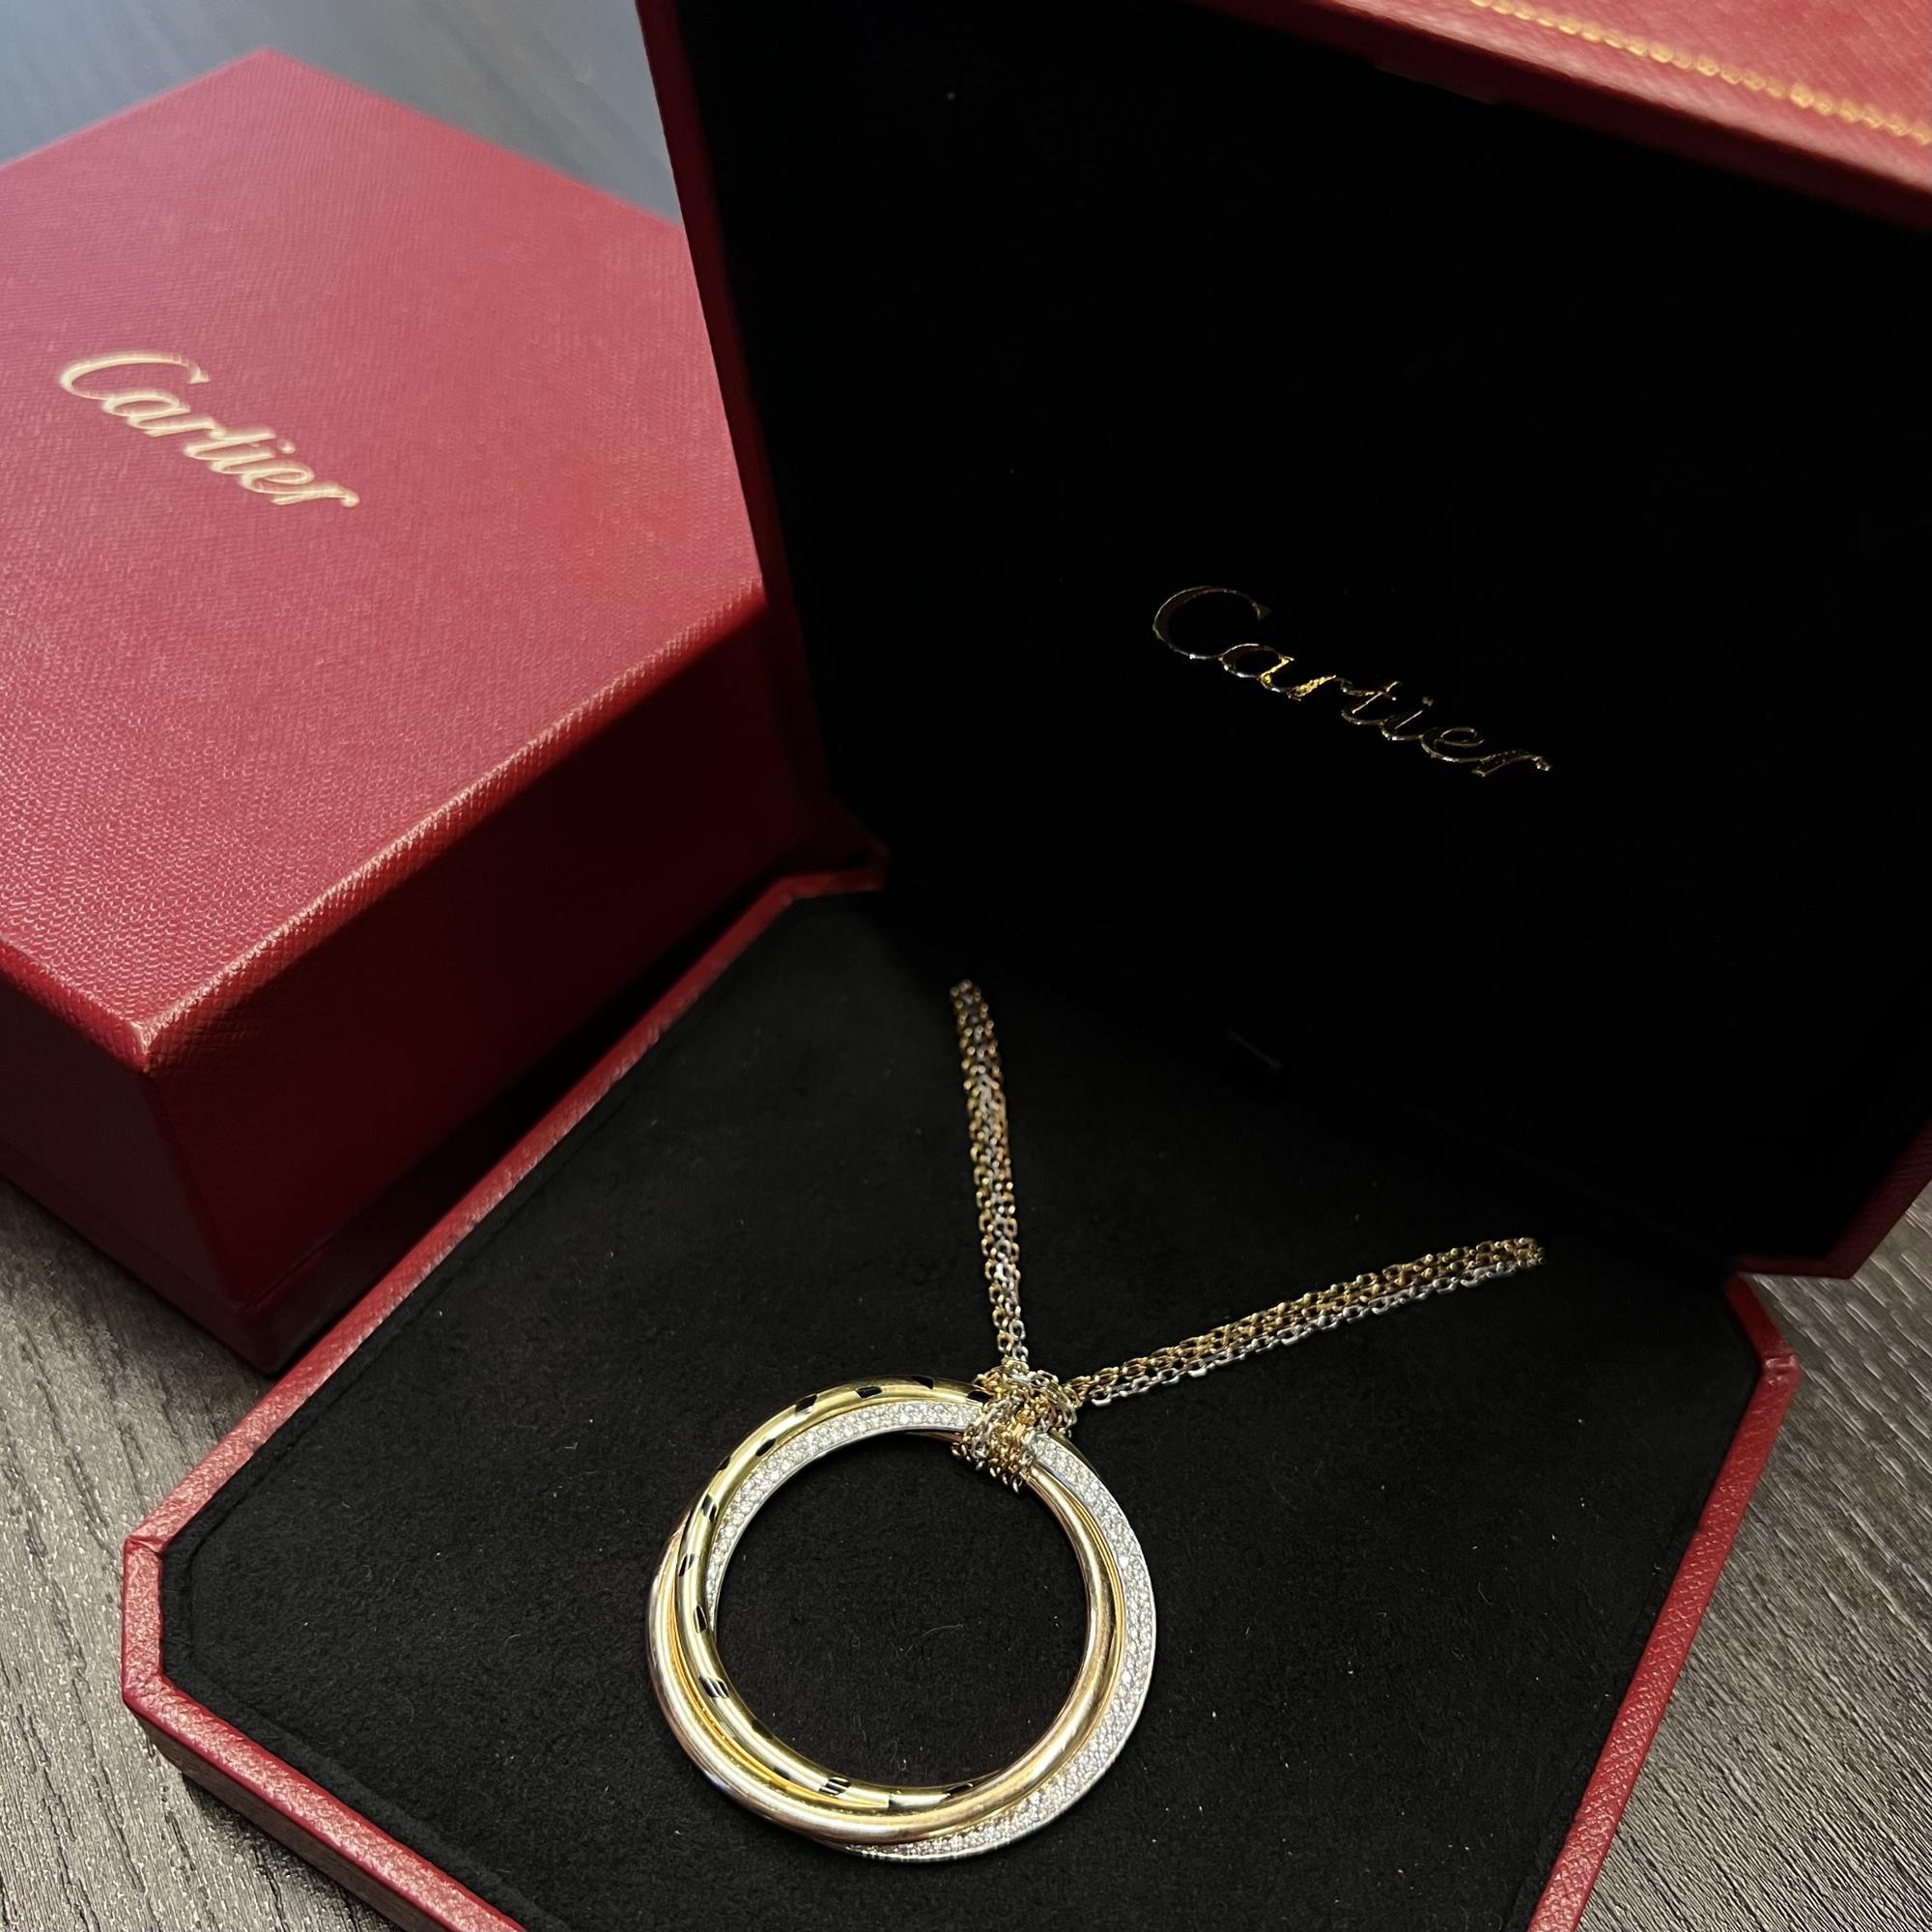 Modern Cartier Tri Color Trinity Diamond Panthere Pendant Necklace 18K Gold 0.88cttw For Sale